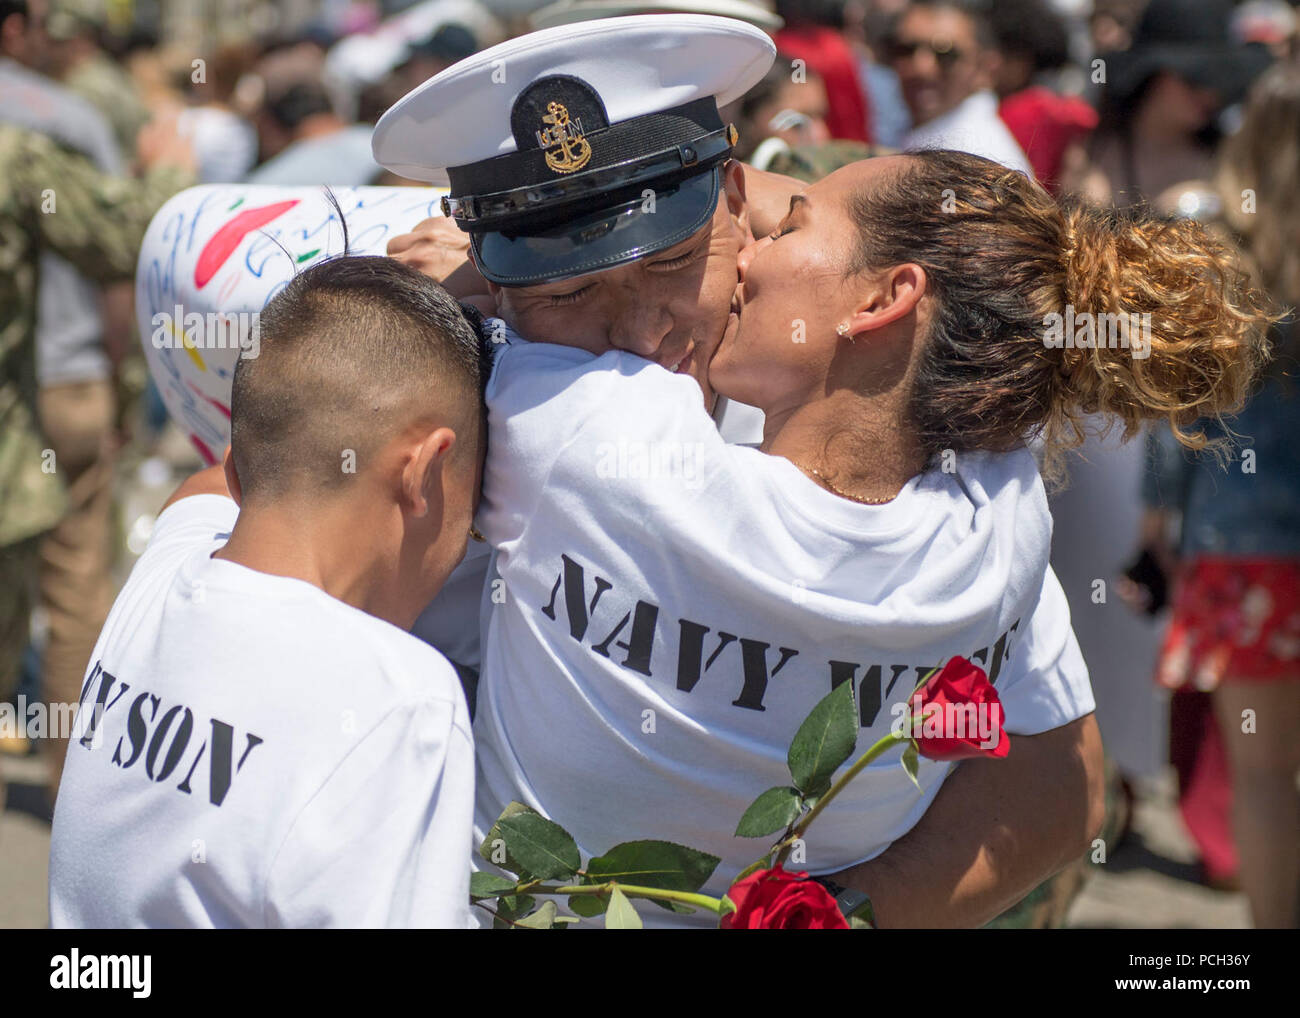 SAN DIEGO (May 7, 2018) Chief Aviation Boatswain’s Mate (Fuel) Miguel Mosquera, assigned to the Nimitz-class aircraft carrier USS Theodore Roosevelt (CVN 71), hugs his family upon the ship's return from a scheduled deployment. Theodore Roosevelt departed San Diego, Oct. 6, 2017 and spent the deployment supporting Operations Inherent Resolve and Freedom’s Sentinel, as well as maritime security cooperation efforts in U.S. 5th and 7th Fleet areas of operation. Stock Photo